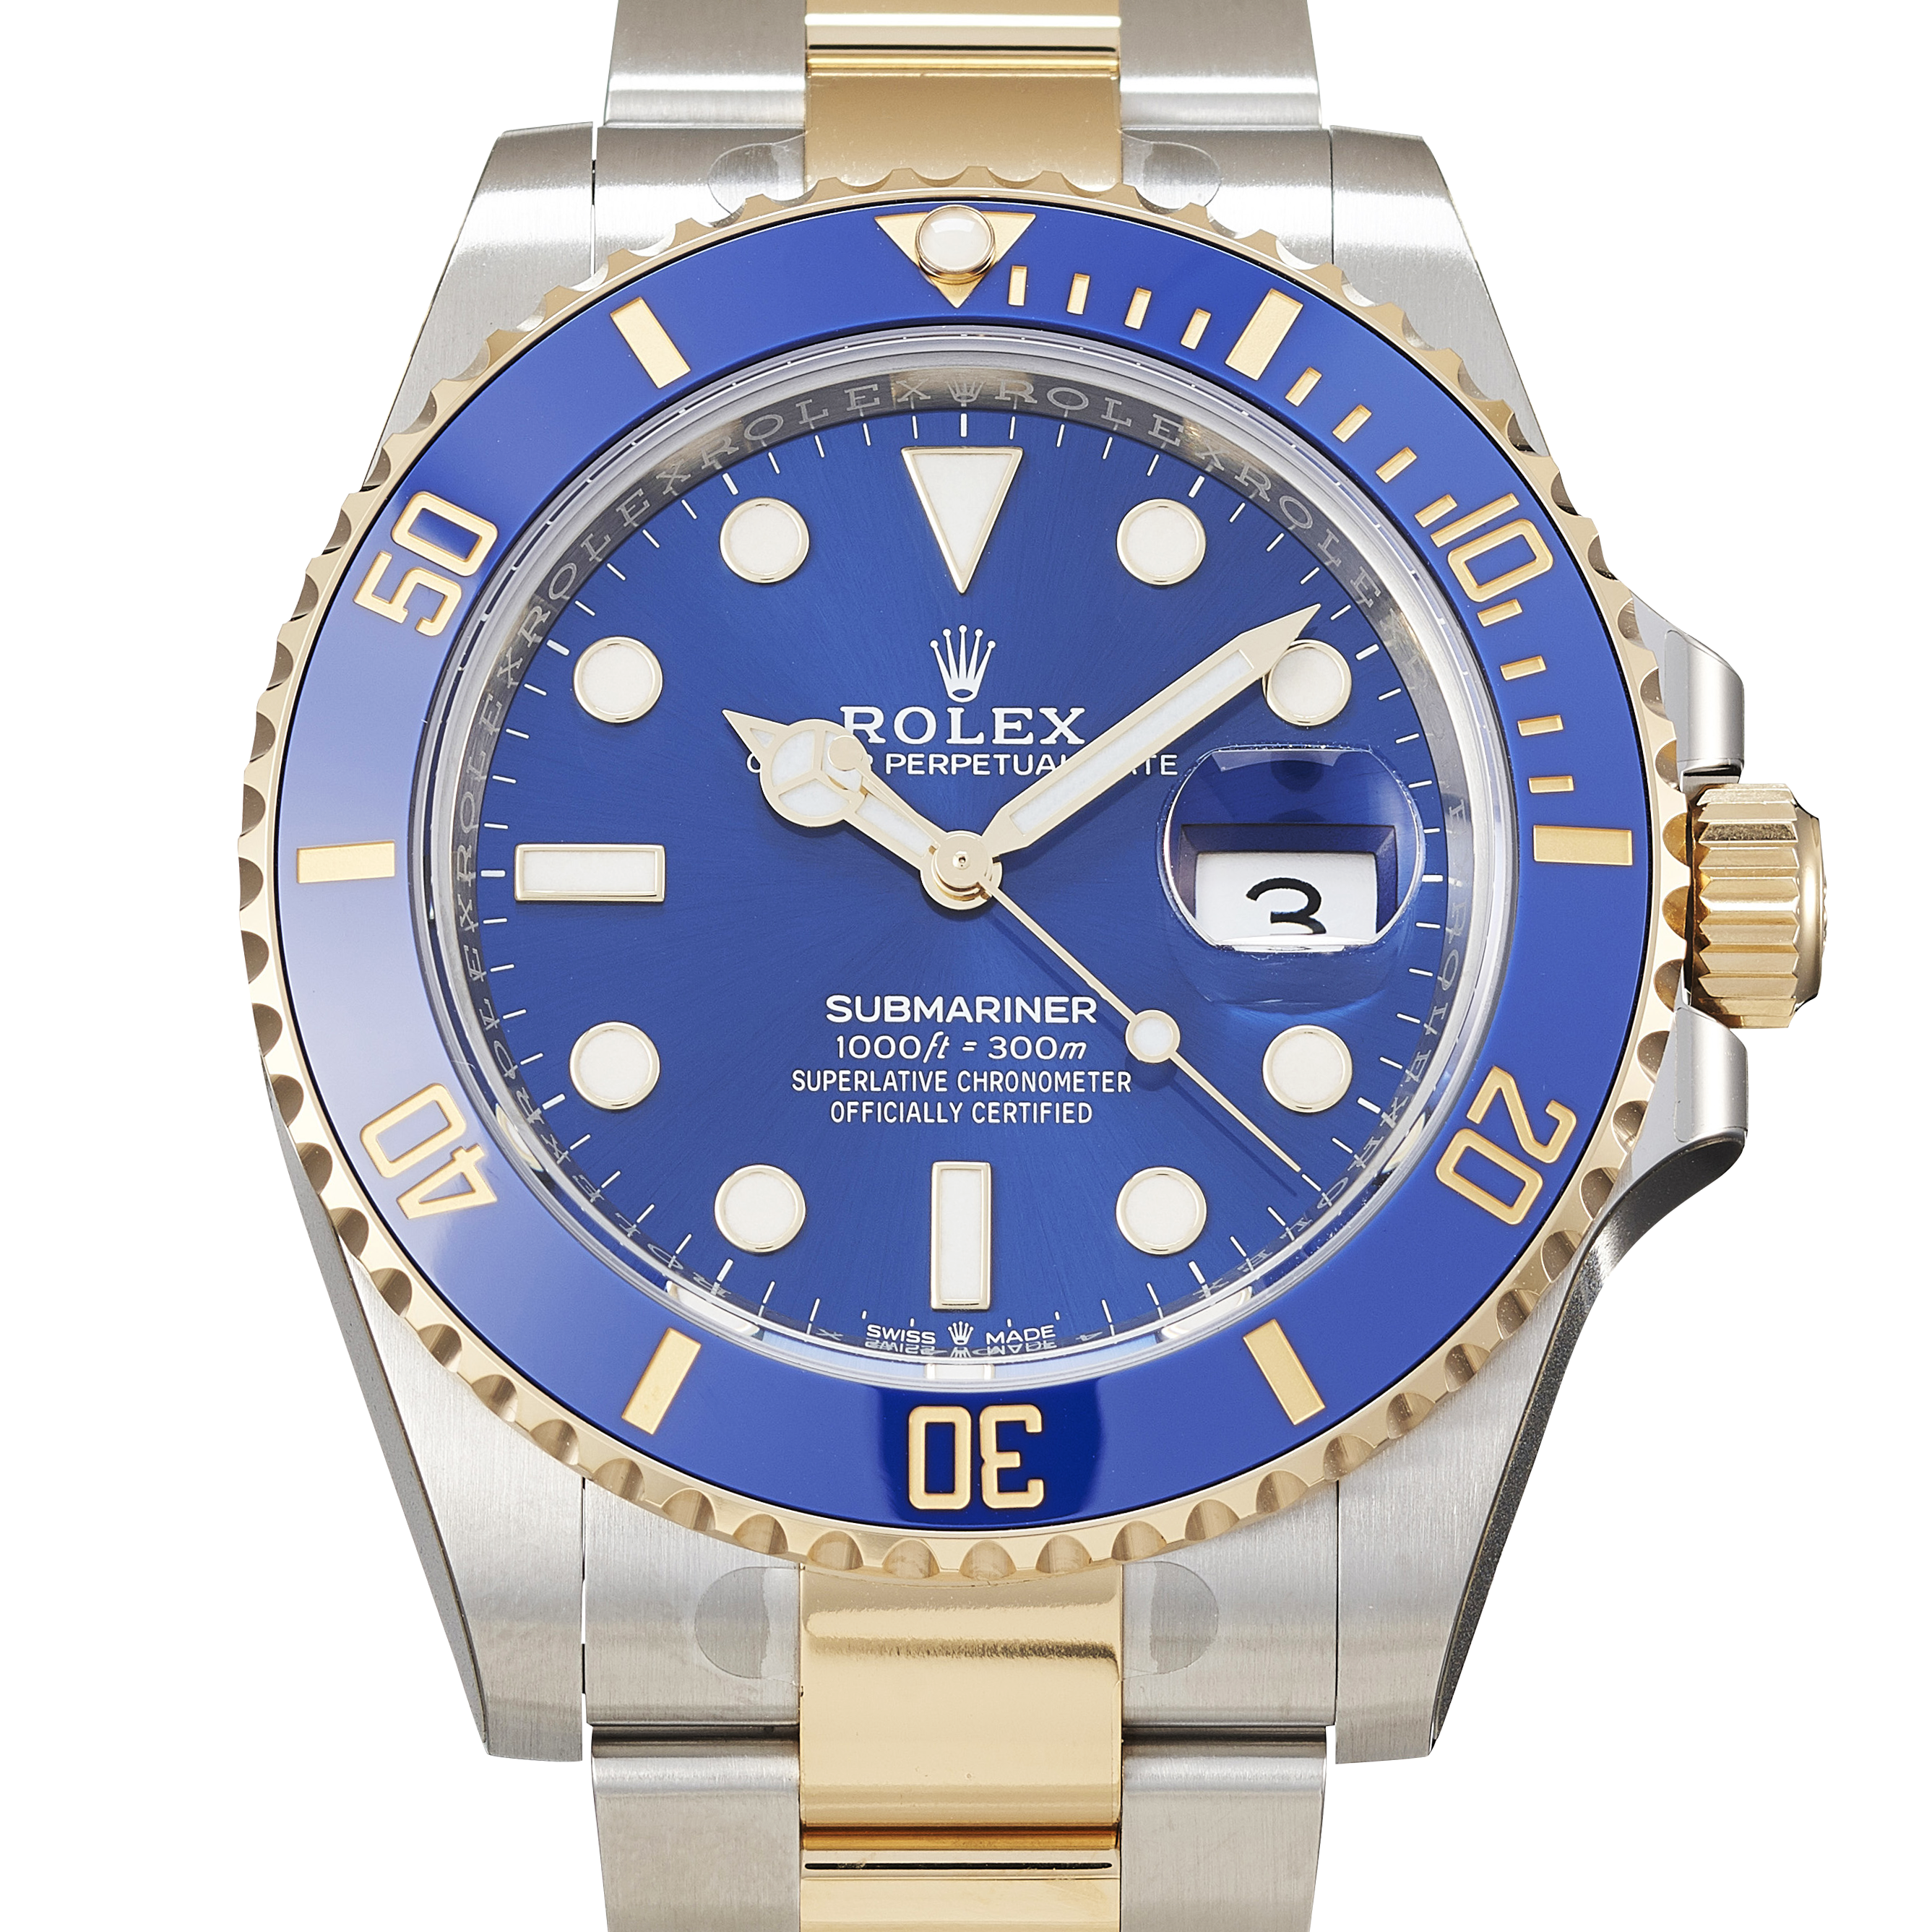 nikotin fiber kyst Buy Rolex watches | Certified Authenticity | CHRONEXT